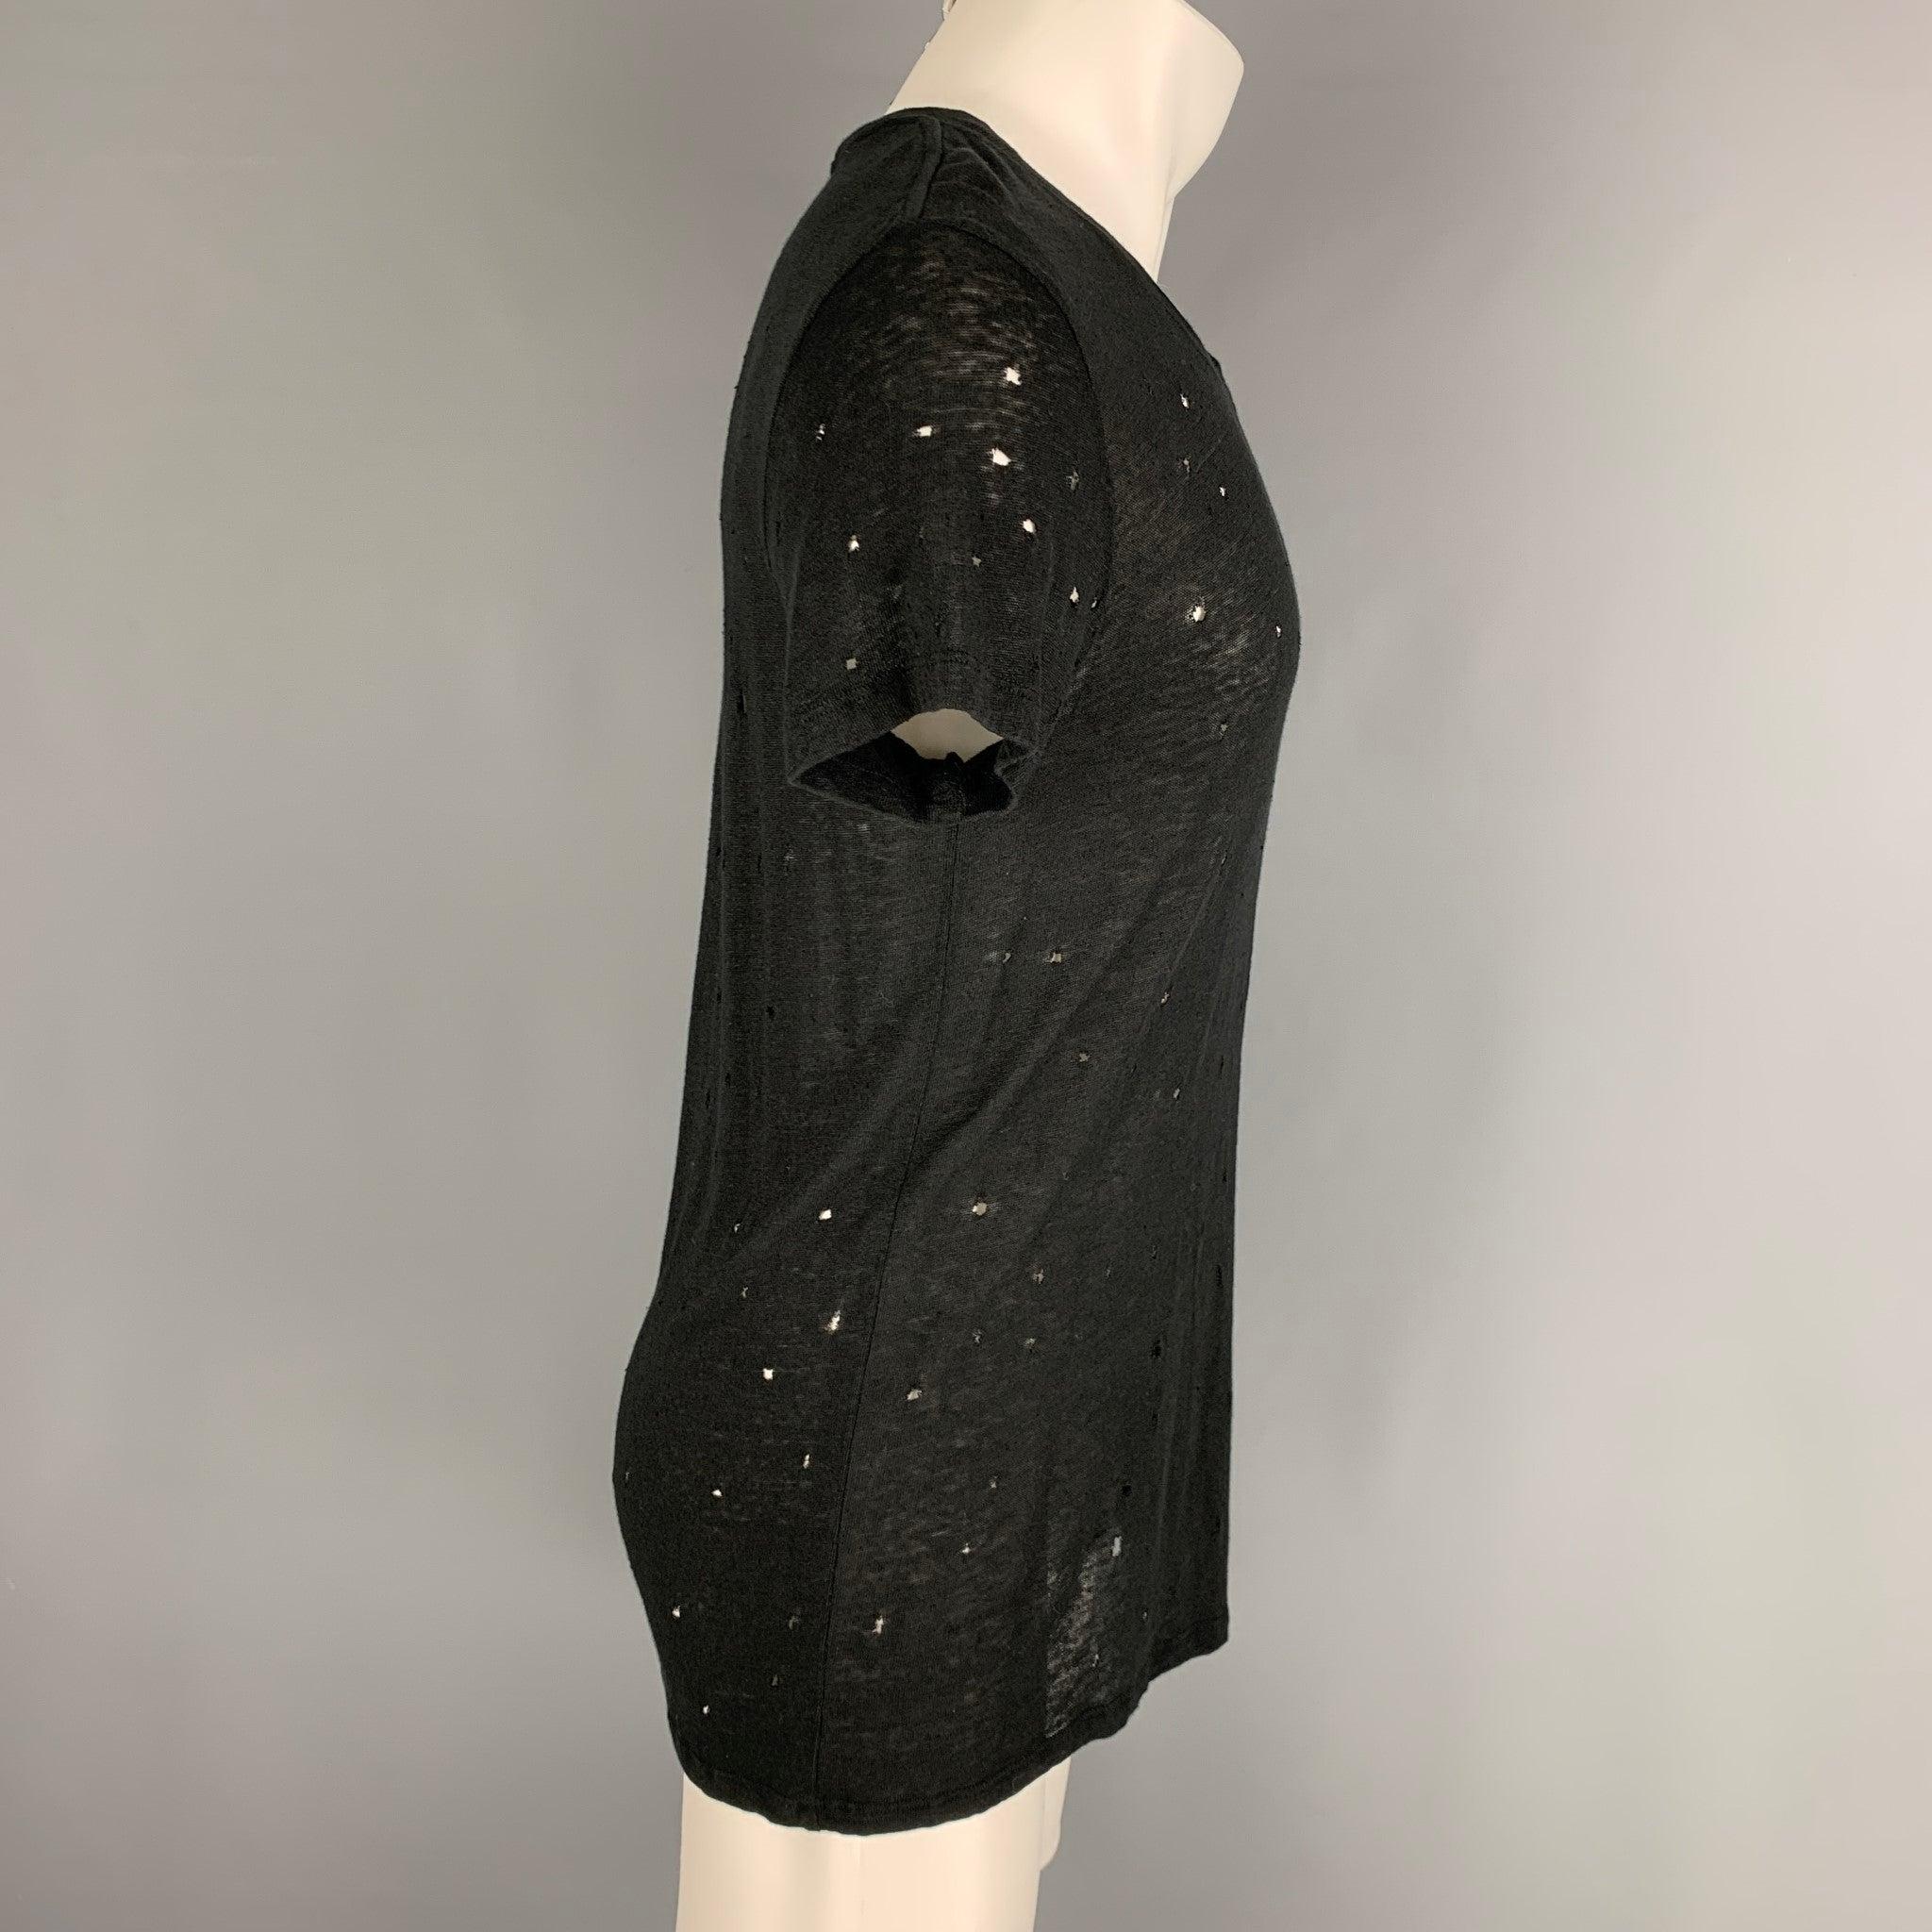 IRO 'Clay' t-shirt comes in a black linen featuring distressed details throughout and a crew-neck. Made in Portugal.Very Good Pre-Owned Condition. 

Marked:   X 

Measurements: 
 
Shoulder: 18 inches Chest: 46 inches 2Sleeve: 8 inches Length: 26.5